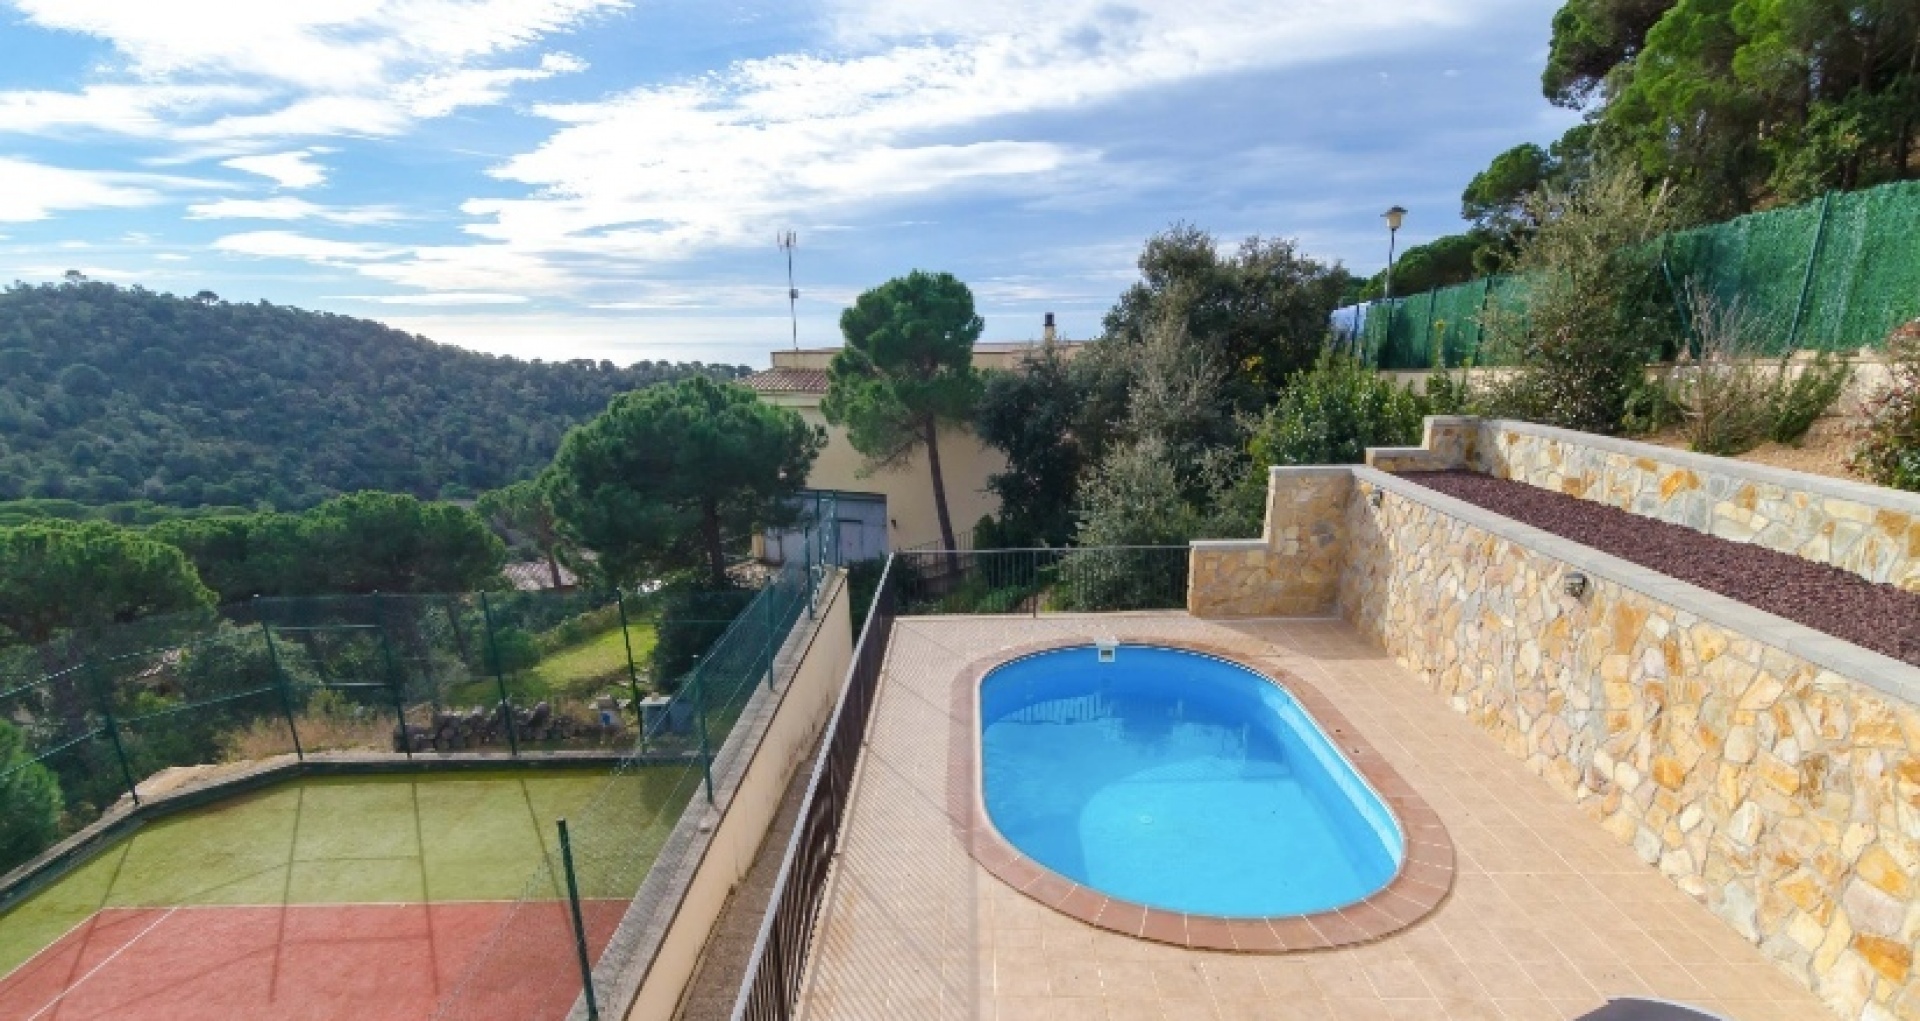 Sea view holiday home for sale with private pool and tennis court